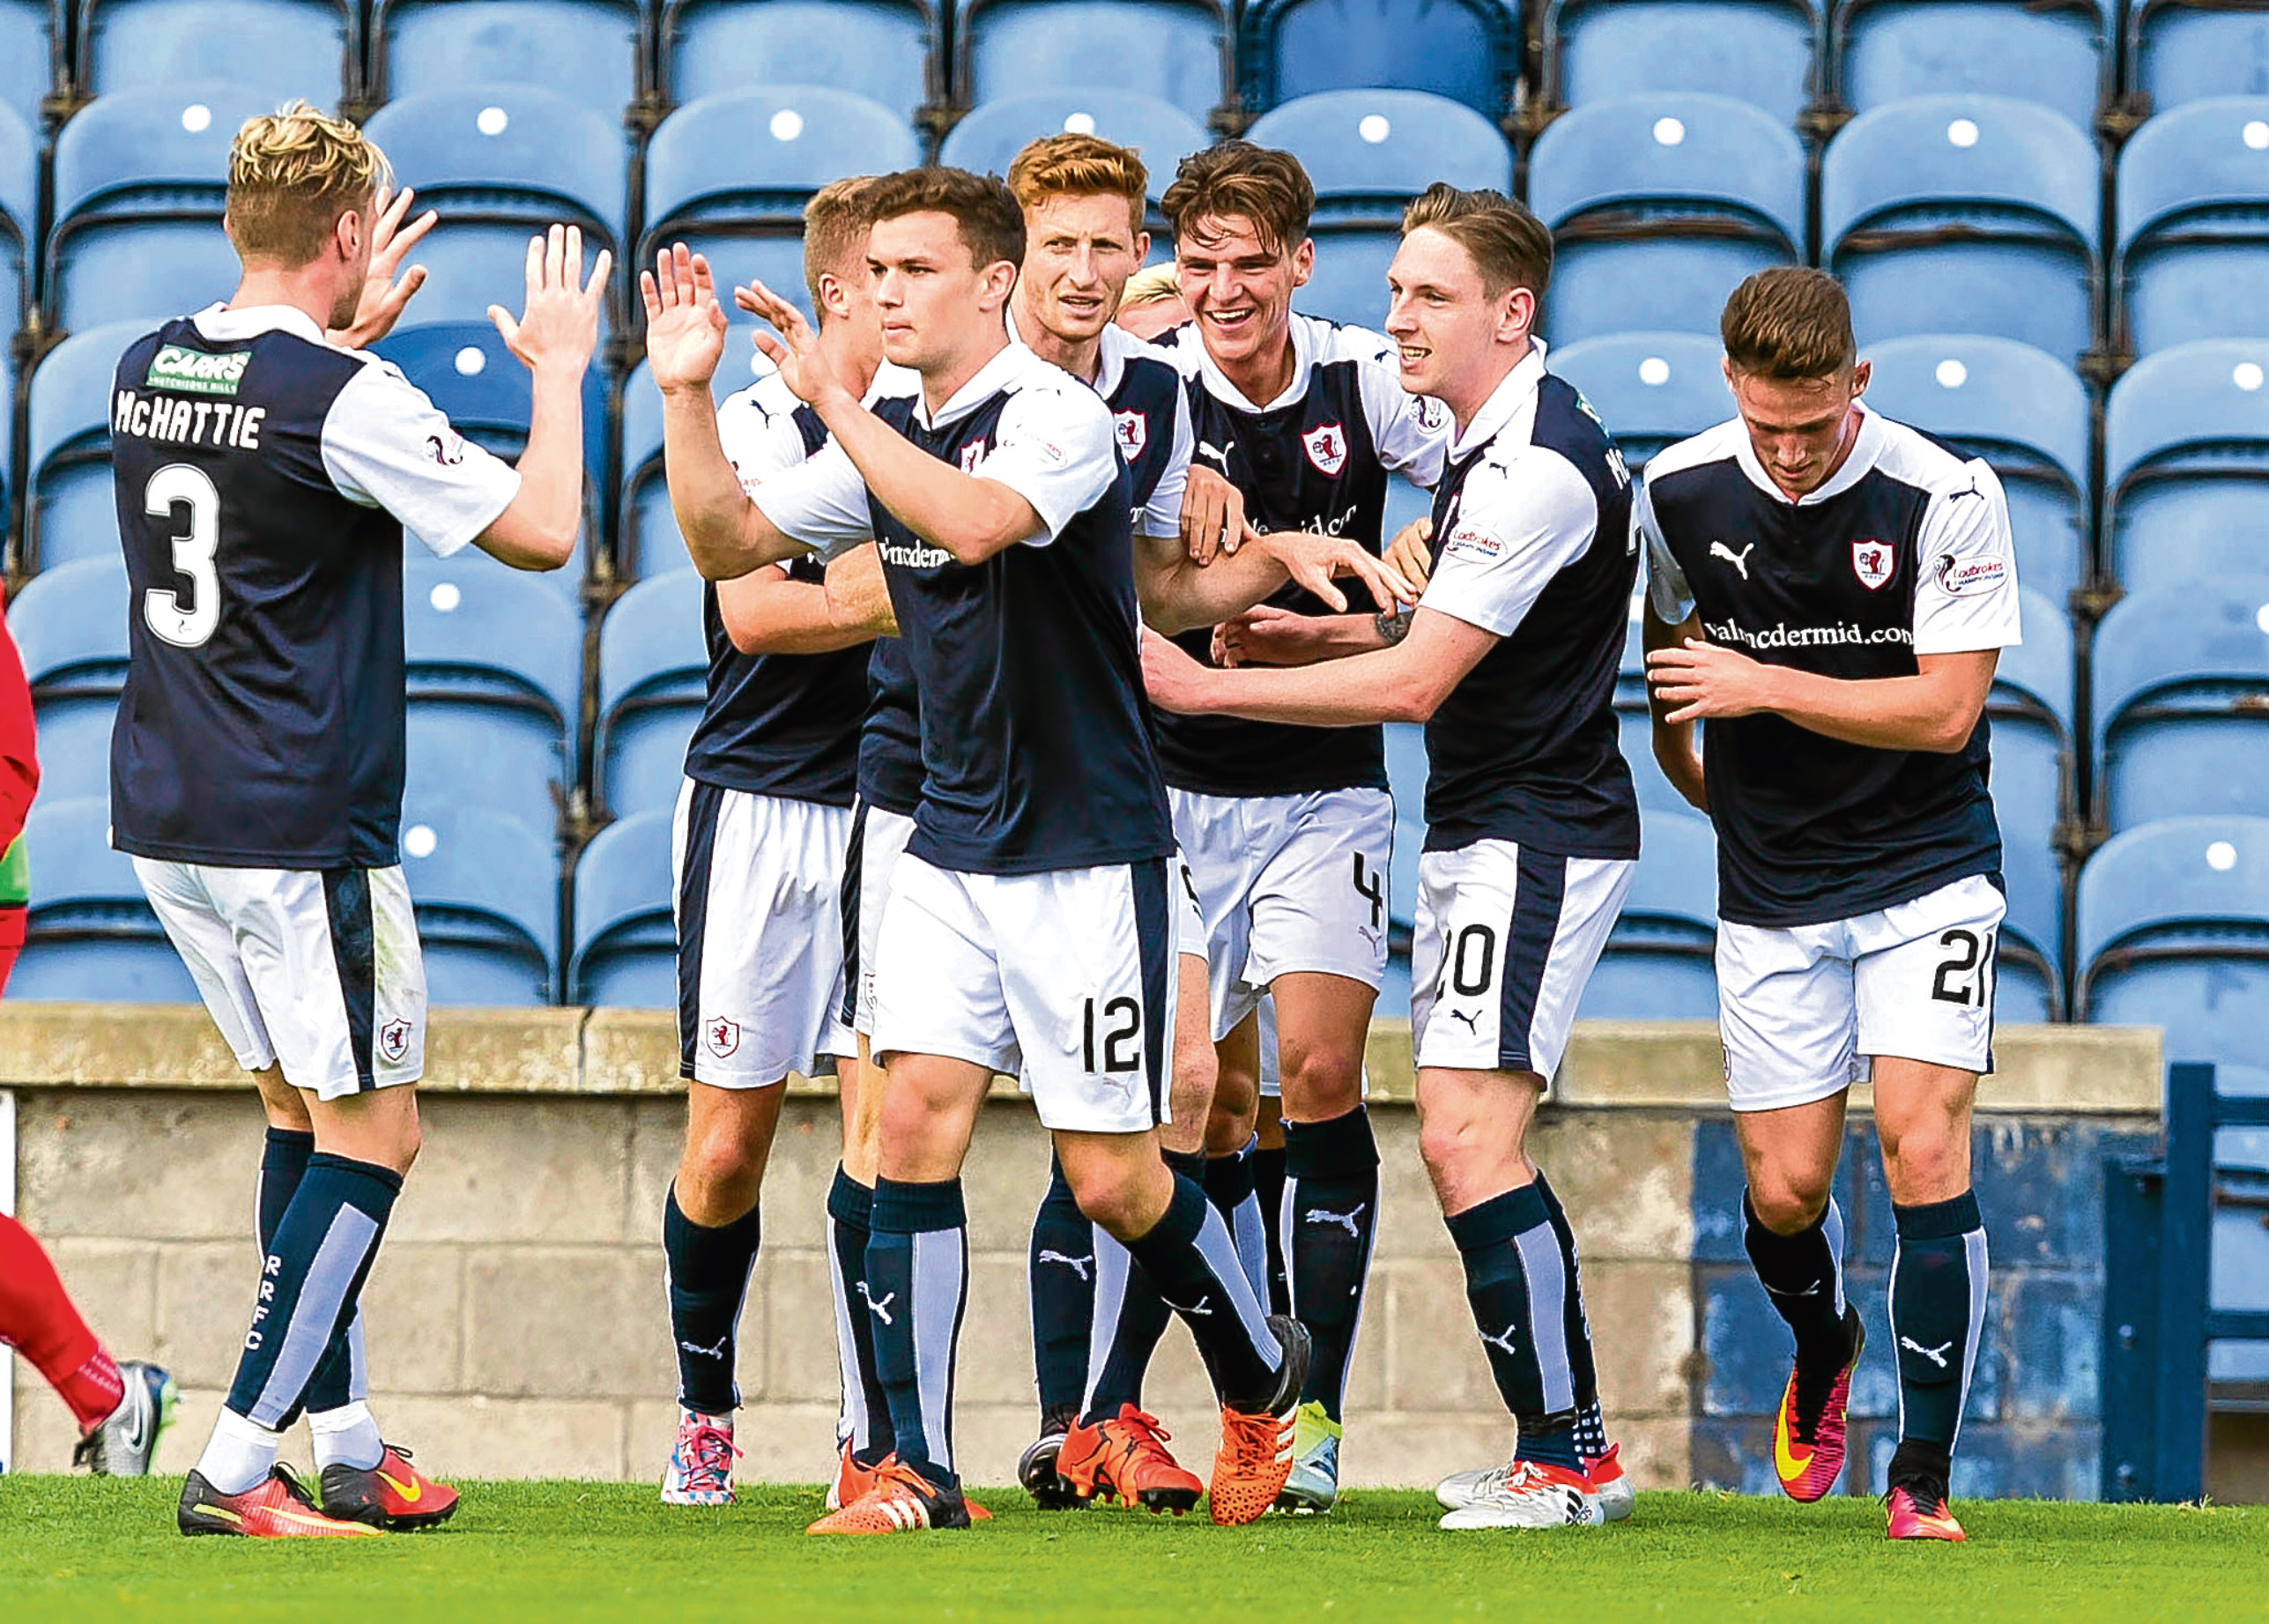 Declan McManus (2nd from right) celebrates his goal with his team-mates.